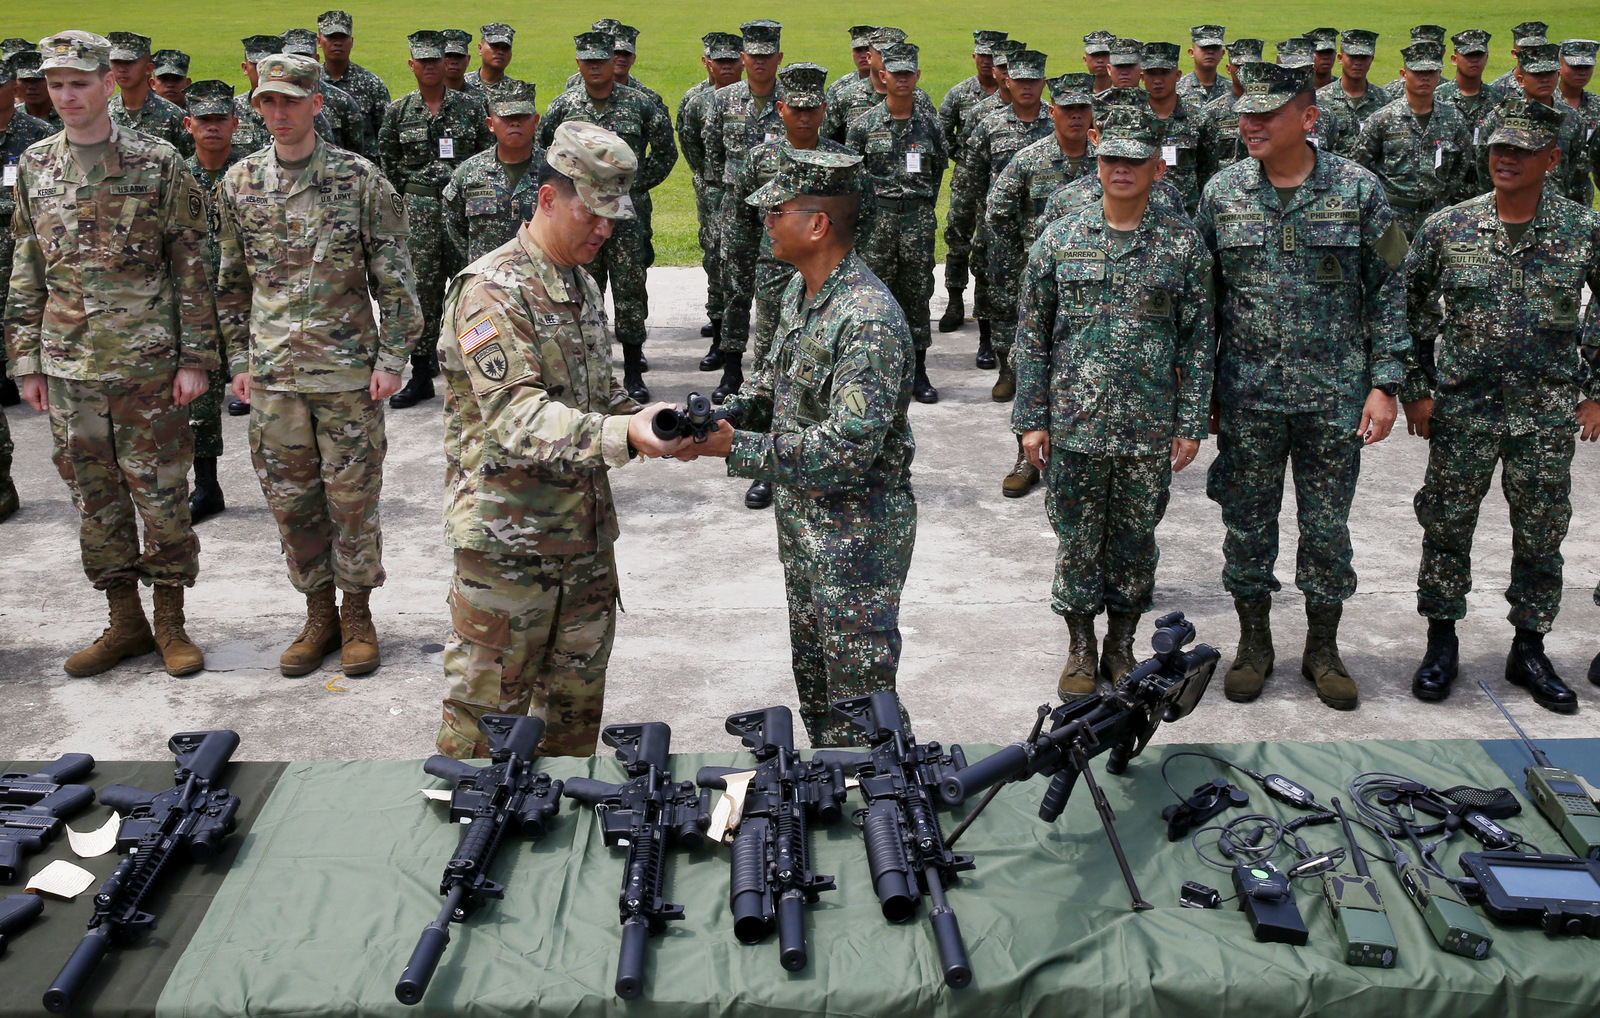 Philippine Maj. Gen. Emmanuel Salamat, receives an M4 rifle with grenade launcher from U.S. Army Col. Ernest Lee during turnover of brand new military weapons and other equipment, June 5, 2017 in suburban Taguig city, Philippines. (AP/Bullit Marquez)